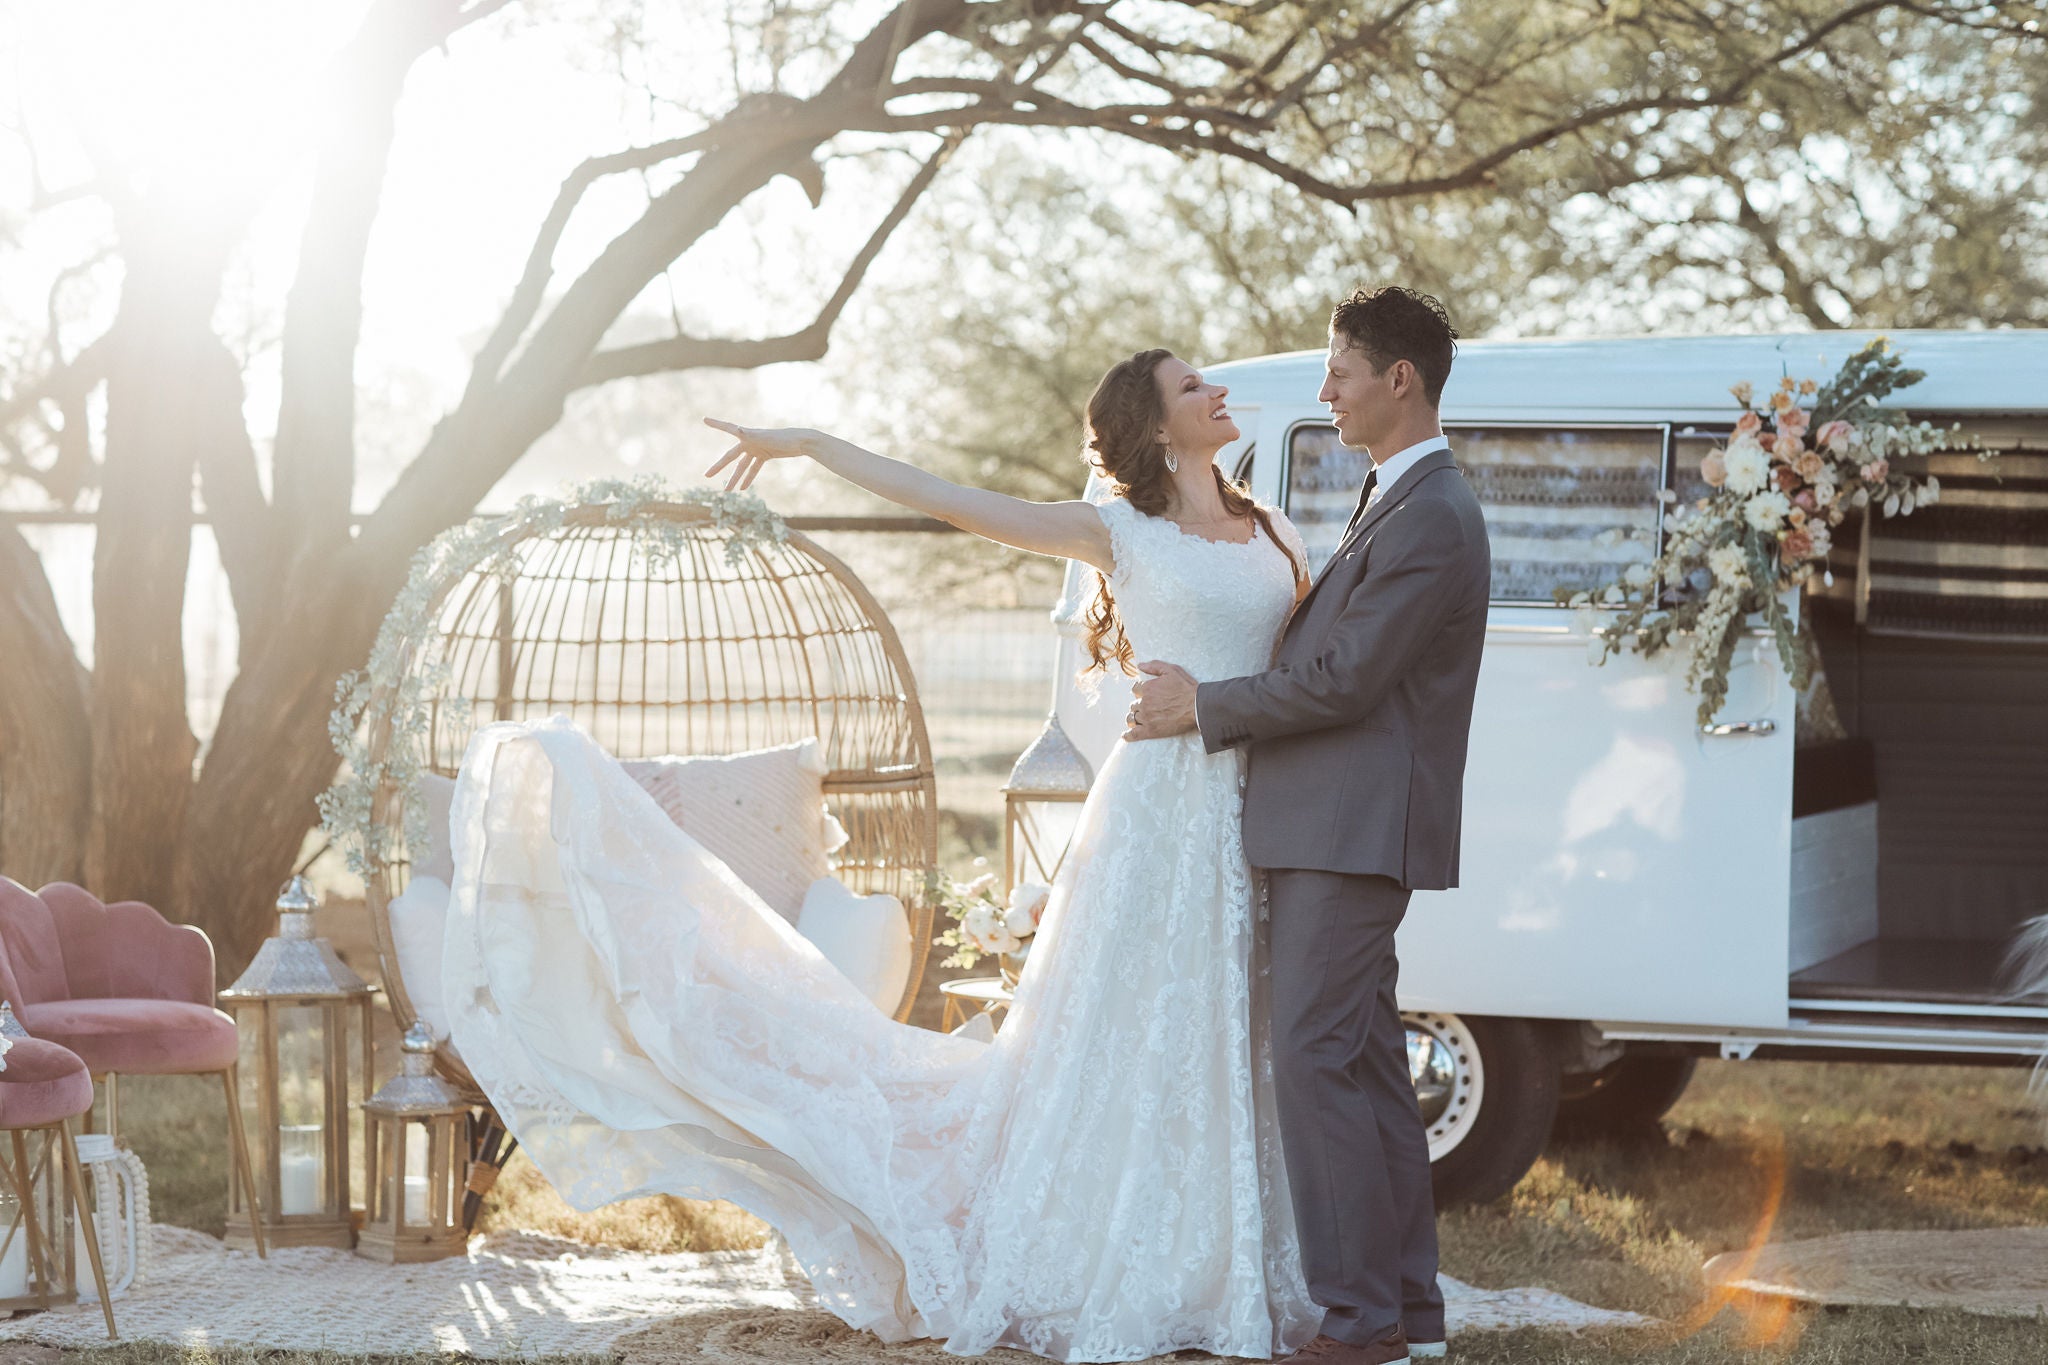 VW Bus Bridals with our Modest Bridal Gown